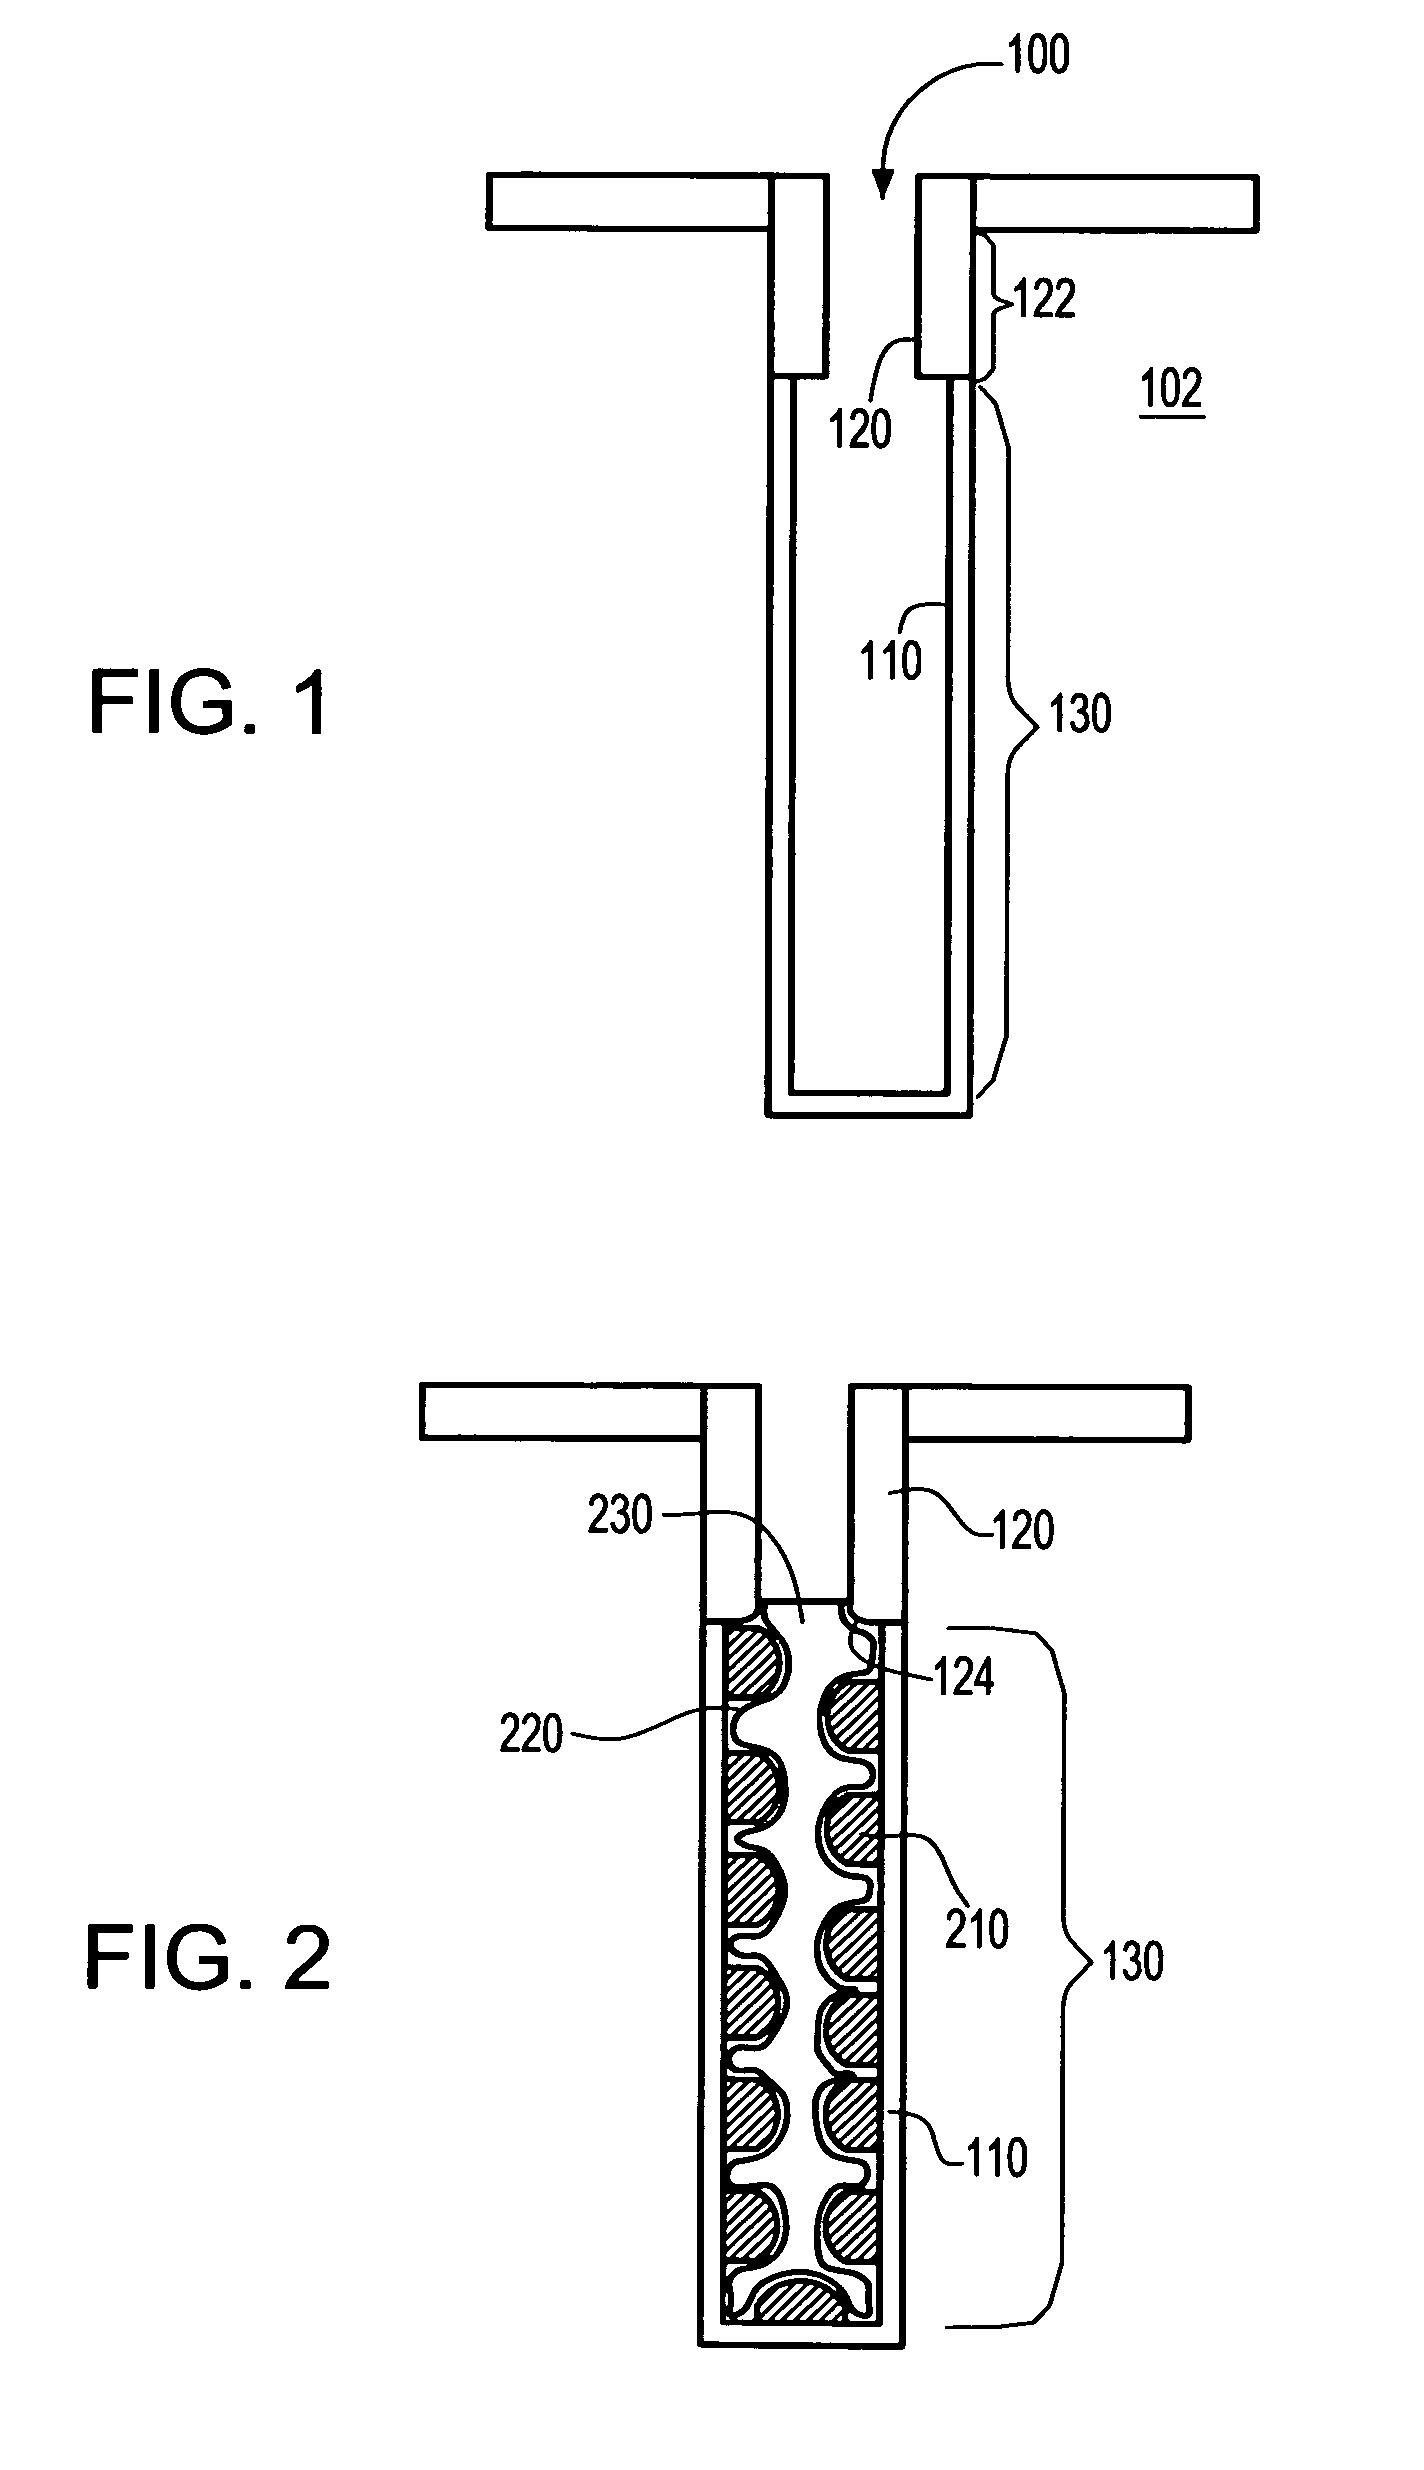 Self-aligned selective hemispherical grain deposition process and structure for enhanced capacitance trench capacitor